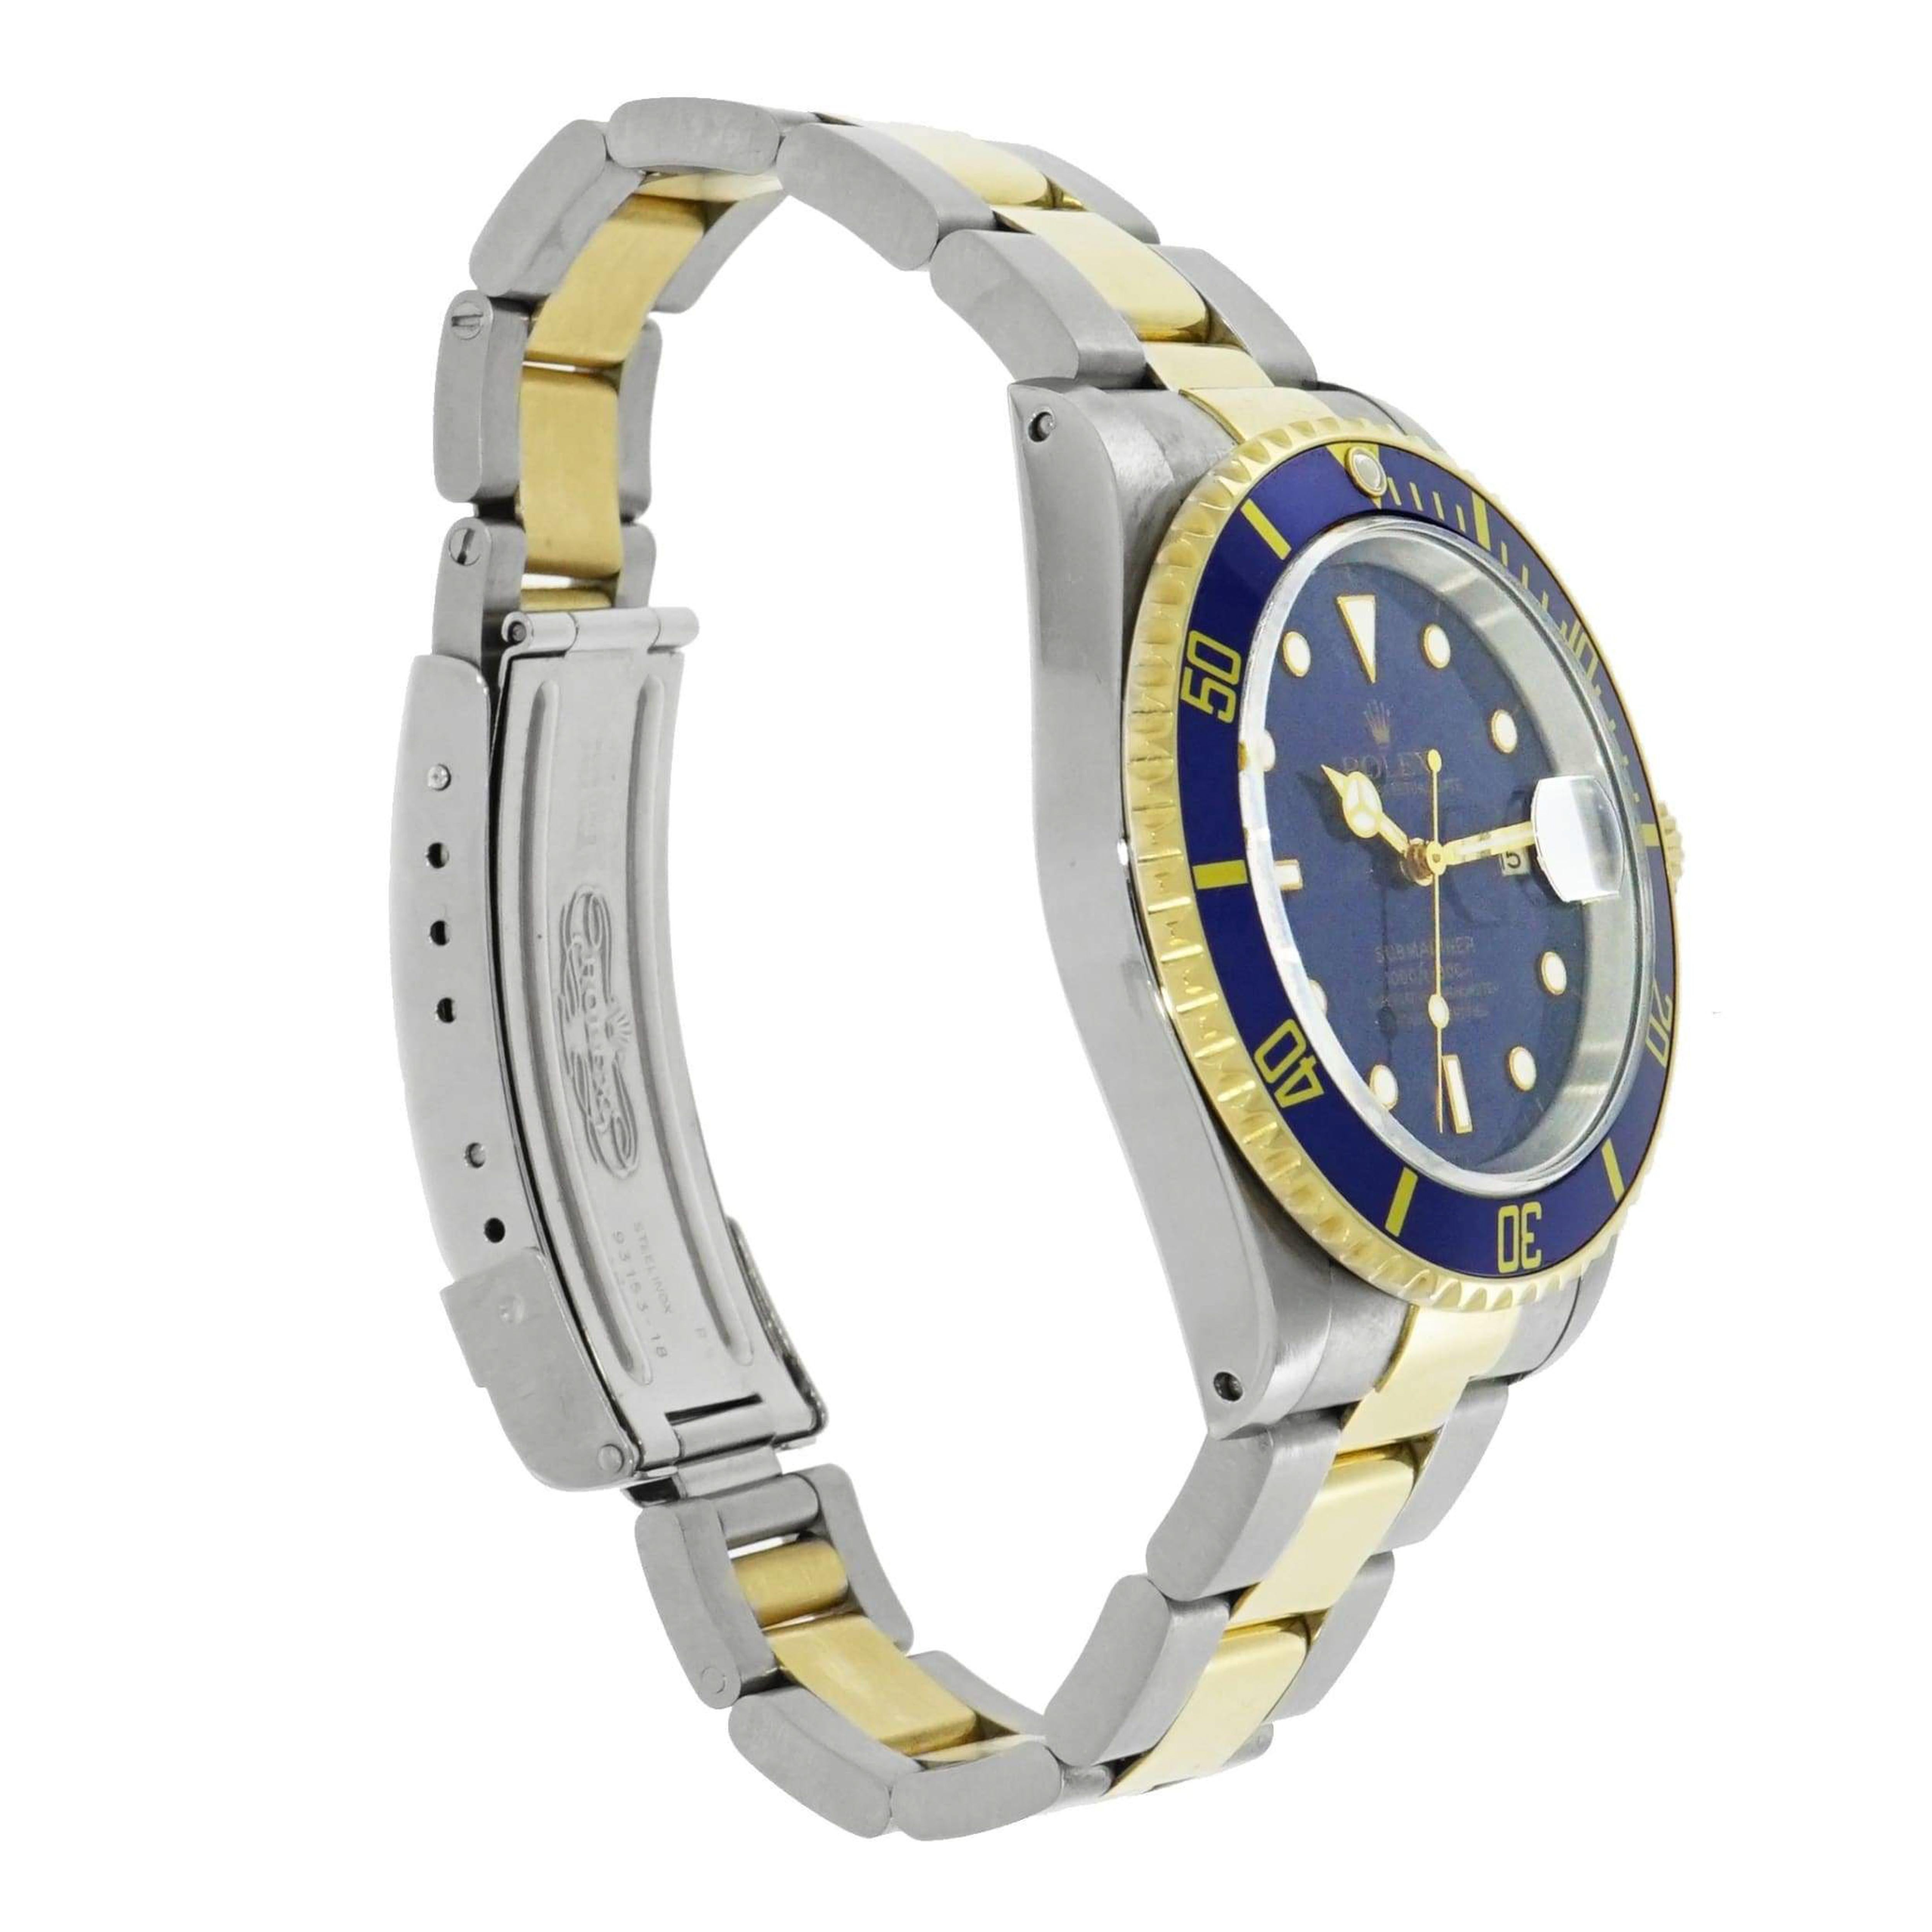 Pre-owned Gents Rolex Submariner Blue Dial Stainless Steel and Yellow Gold, certified chronometer self-winding movement, 40 mm case, blue insert special time lapse unidirectional rotating bezel, scratch resistant sapphire crystal with Cyclops